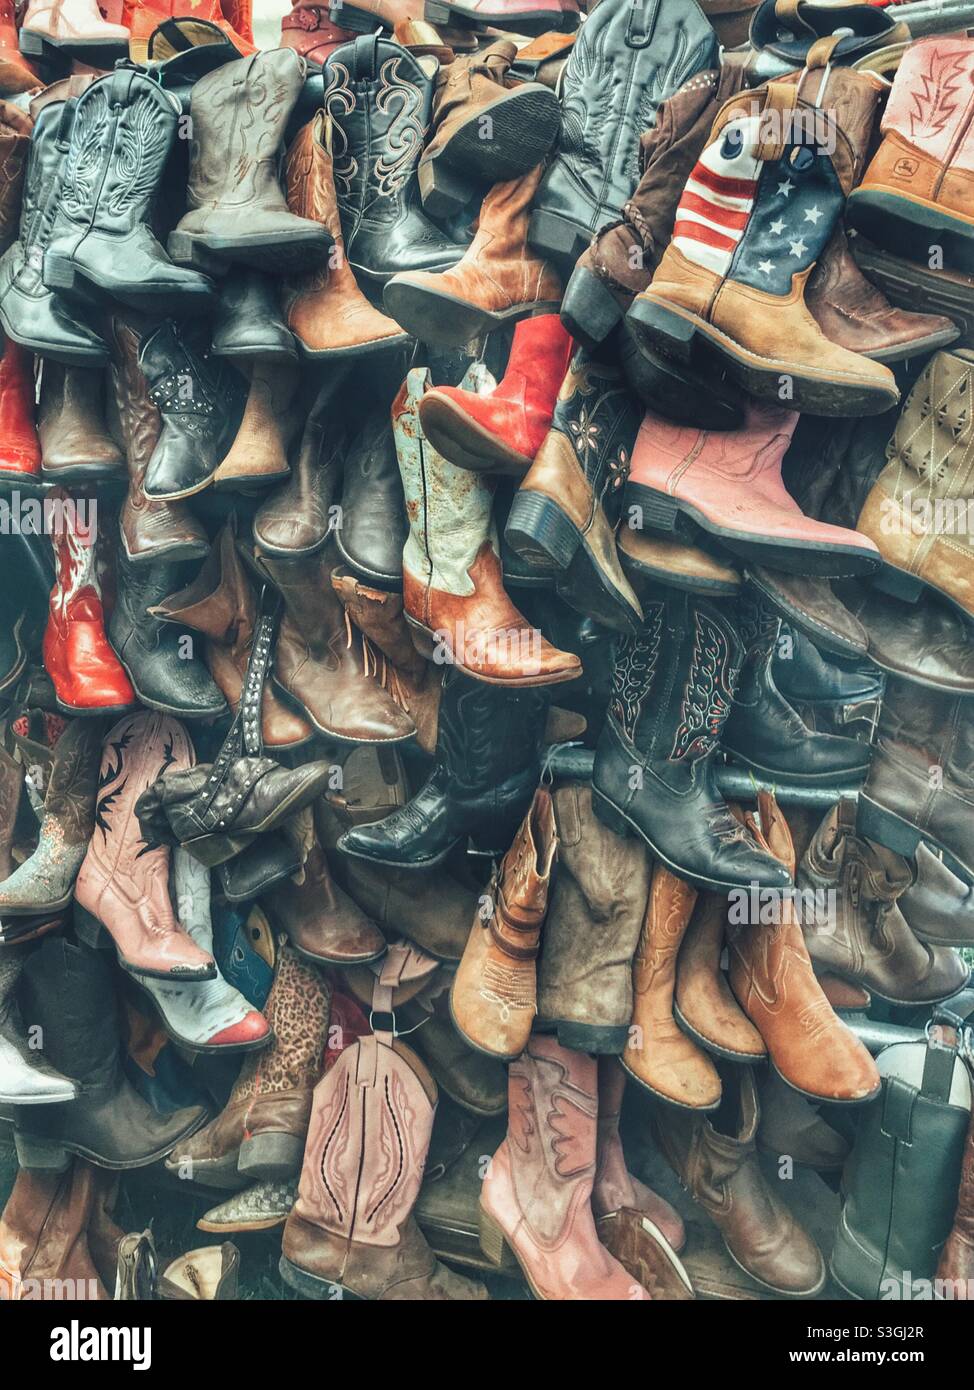 Vender’s display of used boots for sale Stock Photo